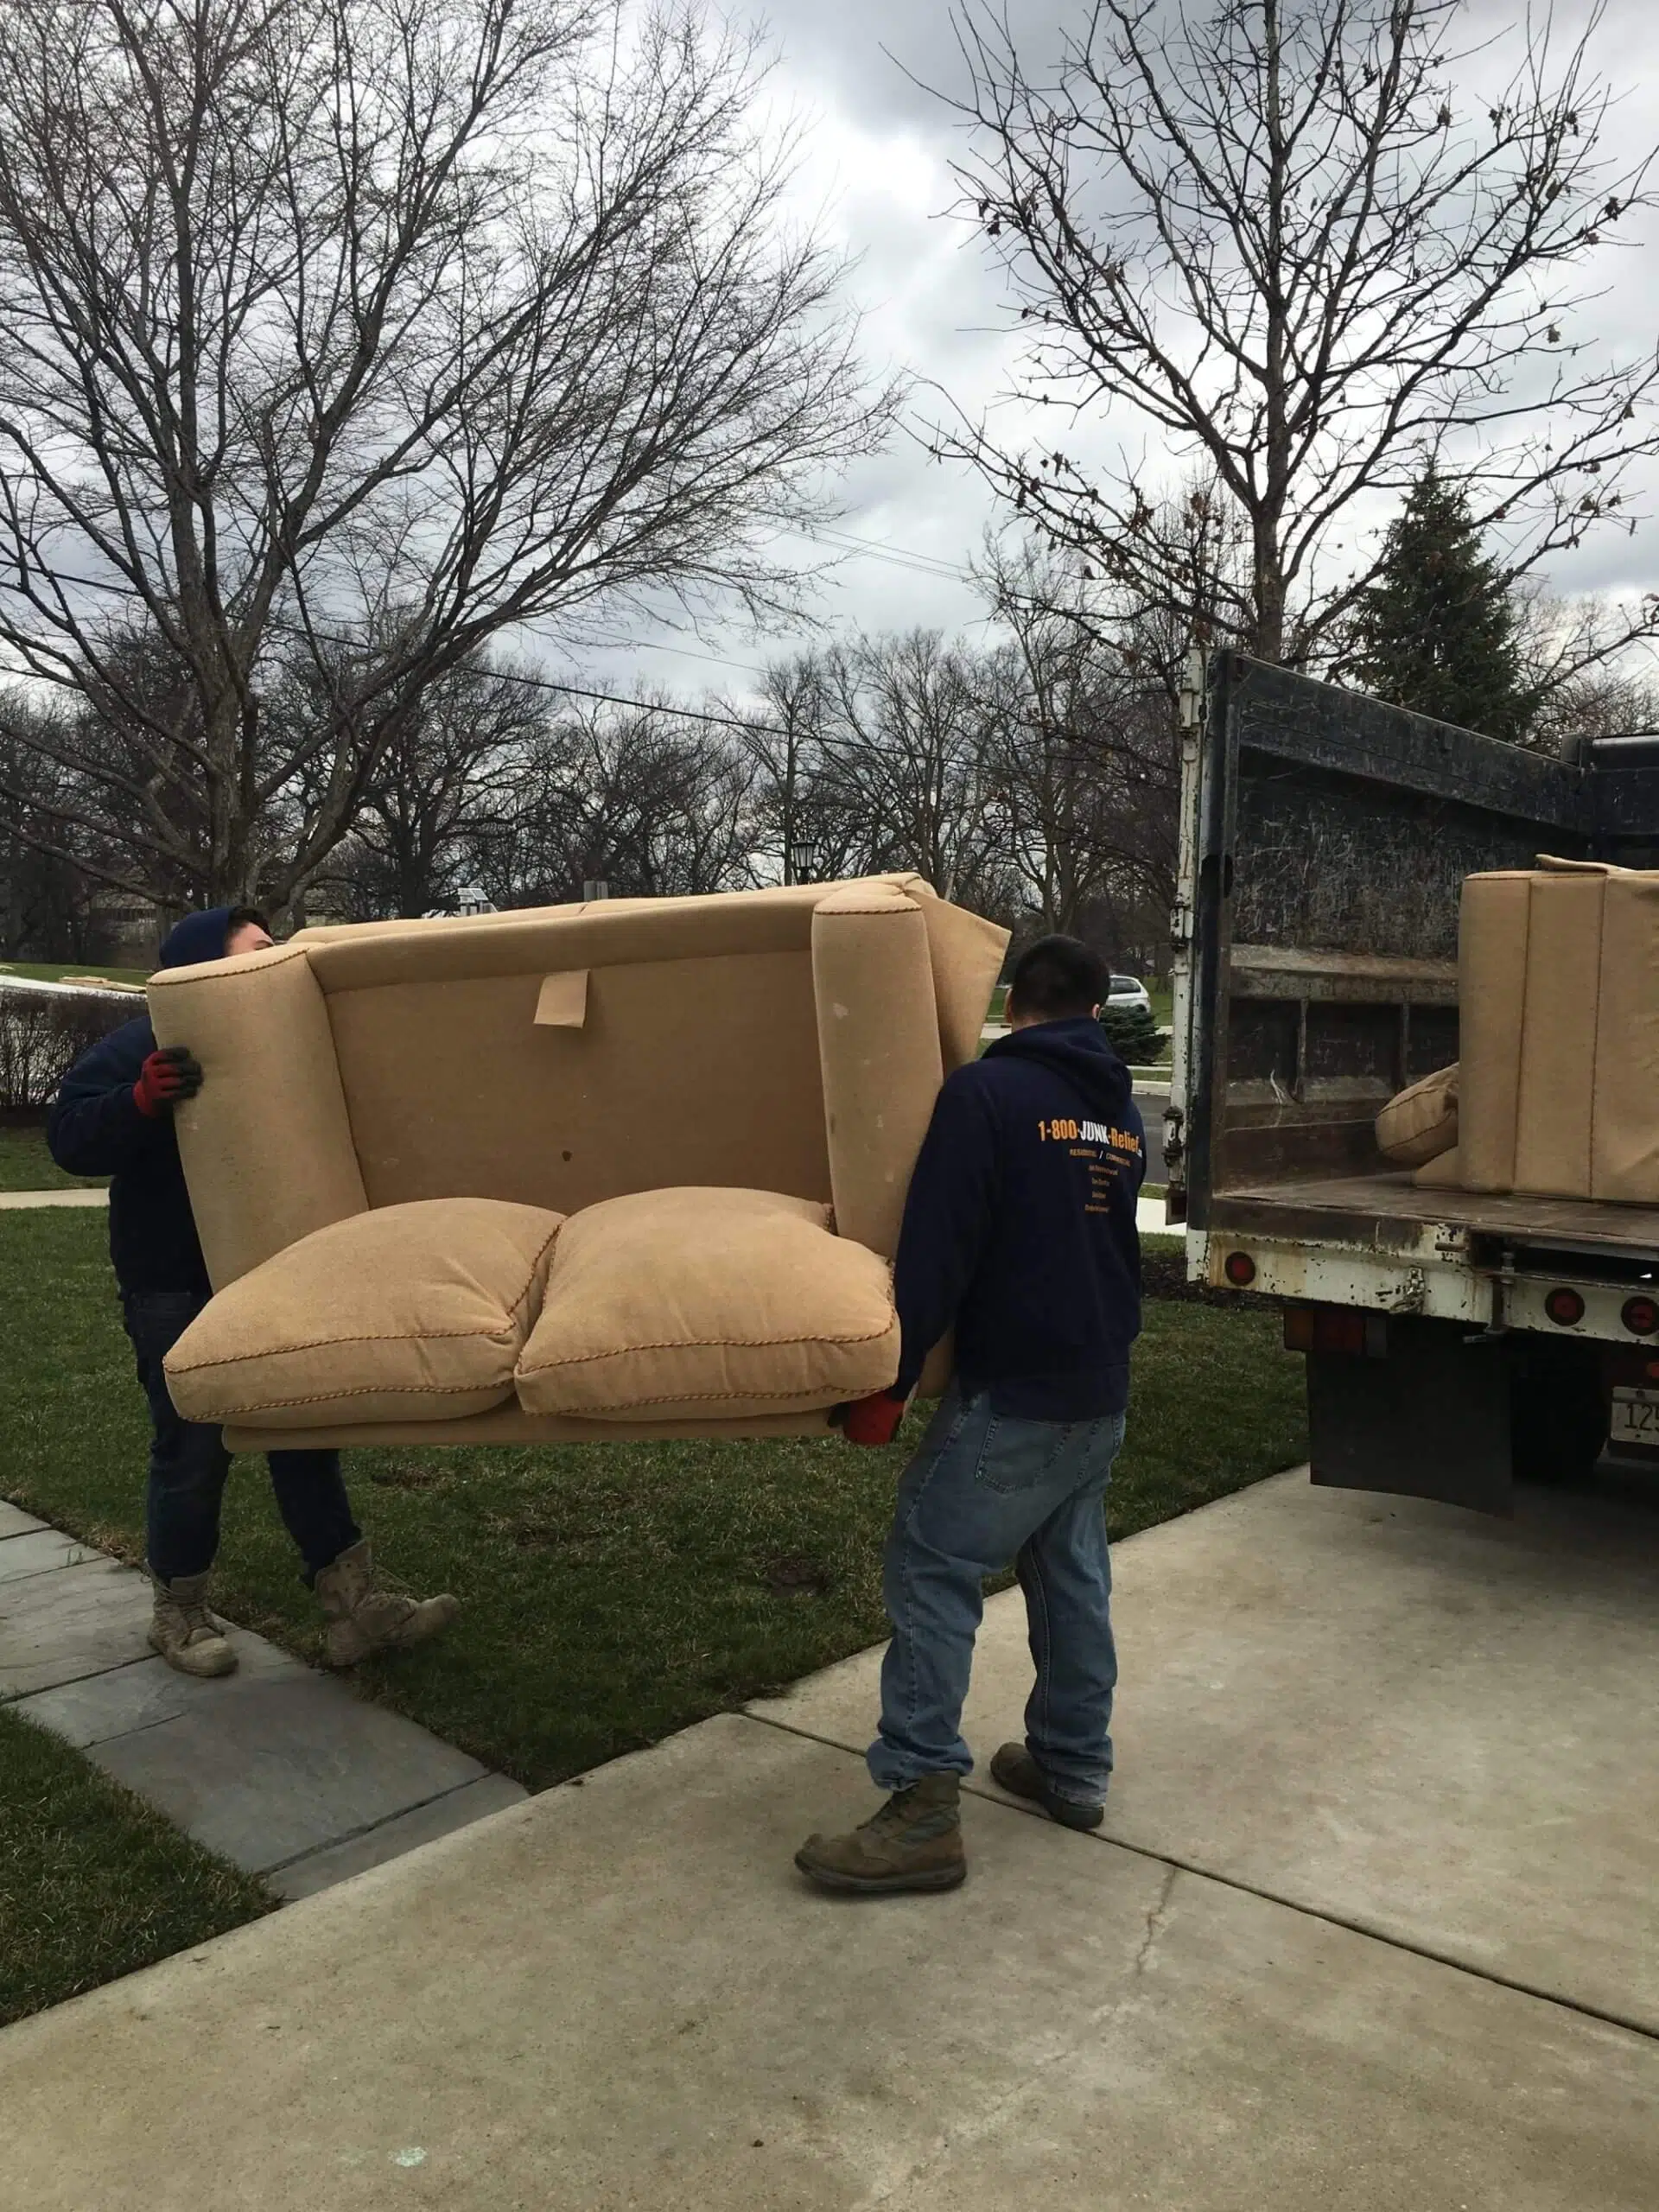 Junk Removal specialists removing a couch from a house in Chicago suburbs | Junk Relief Chicago